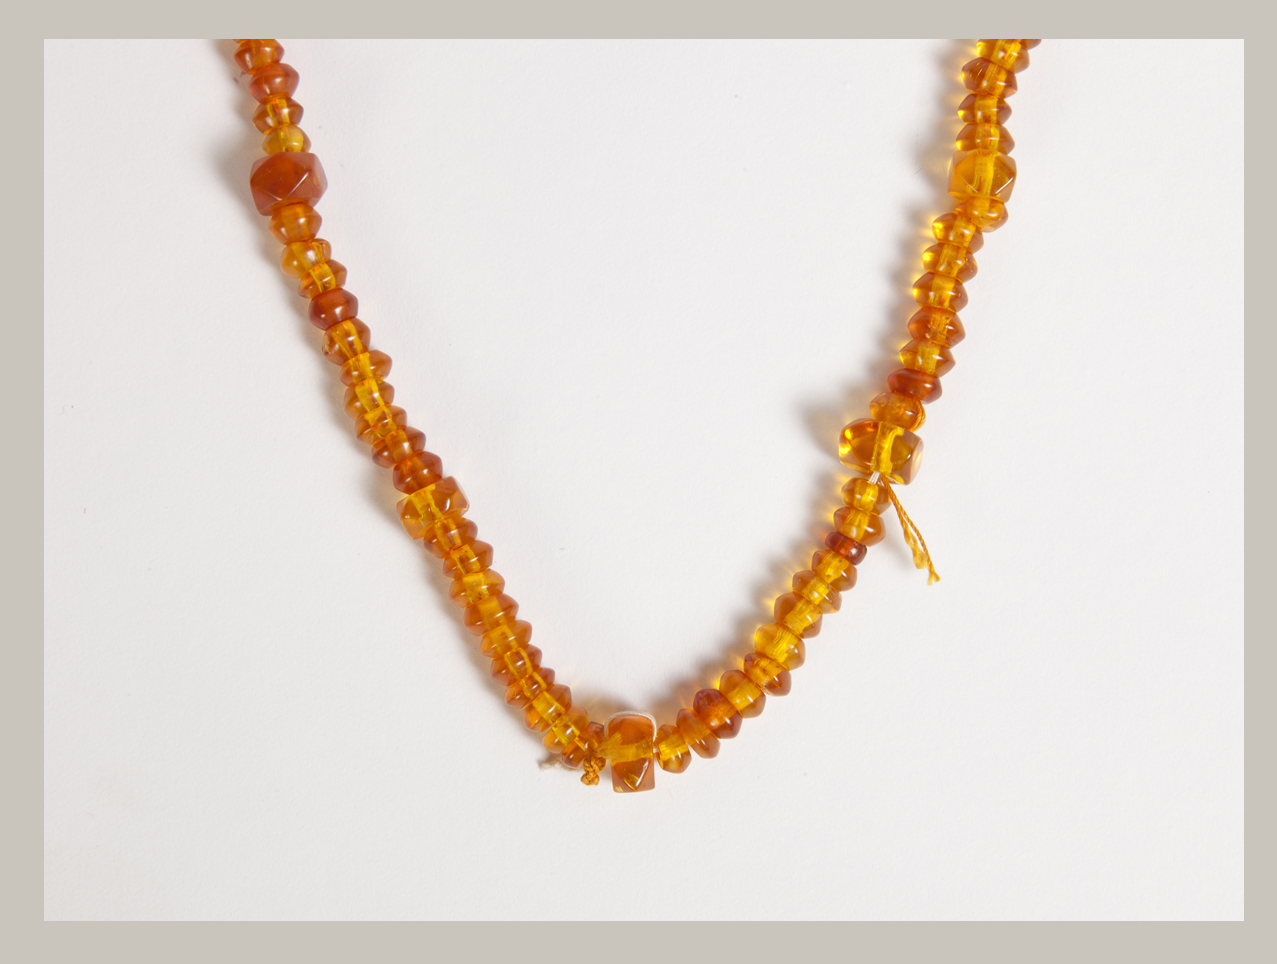 Paternoster-Beads-Necklace-Amber-Grand-Parade-02